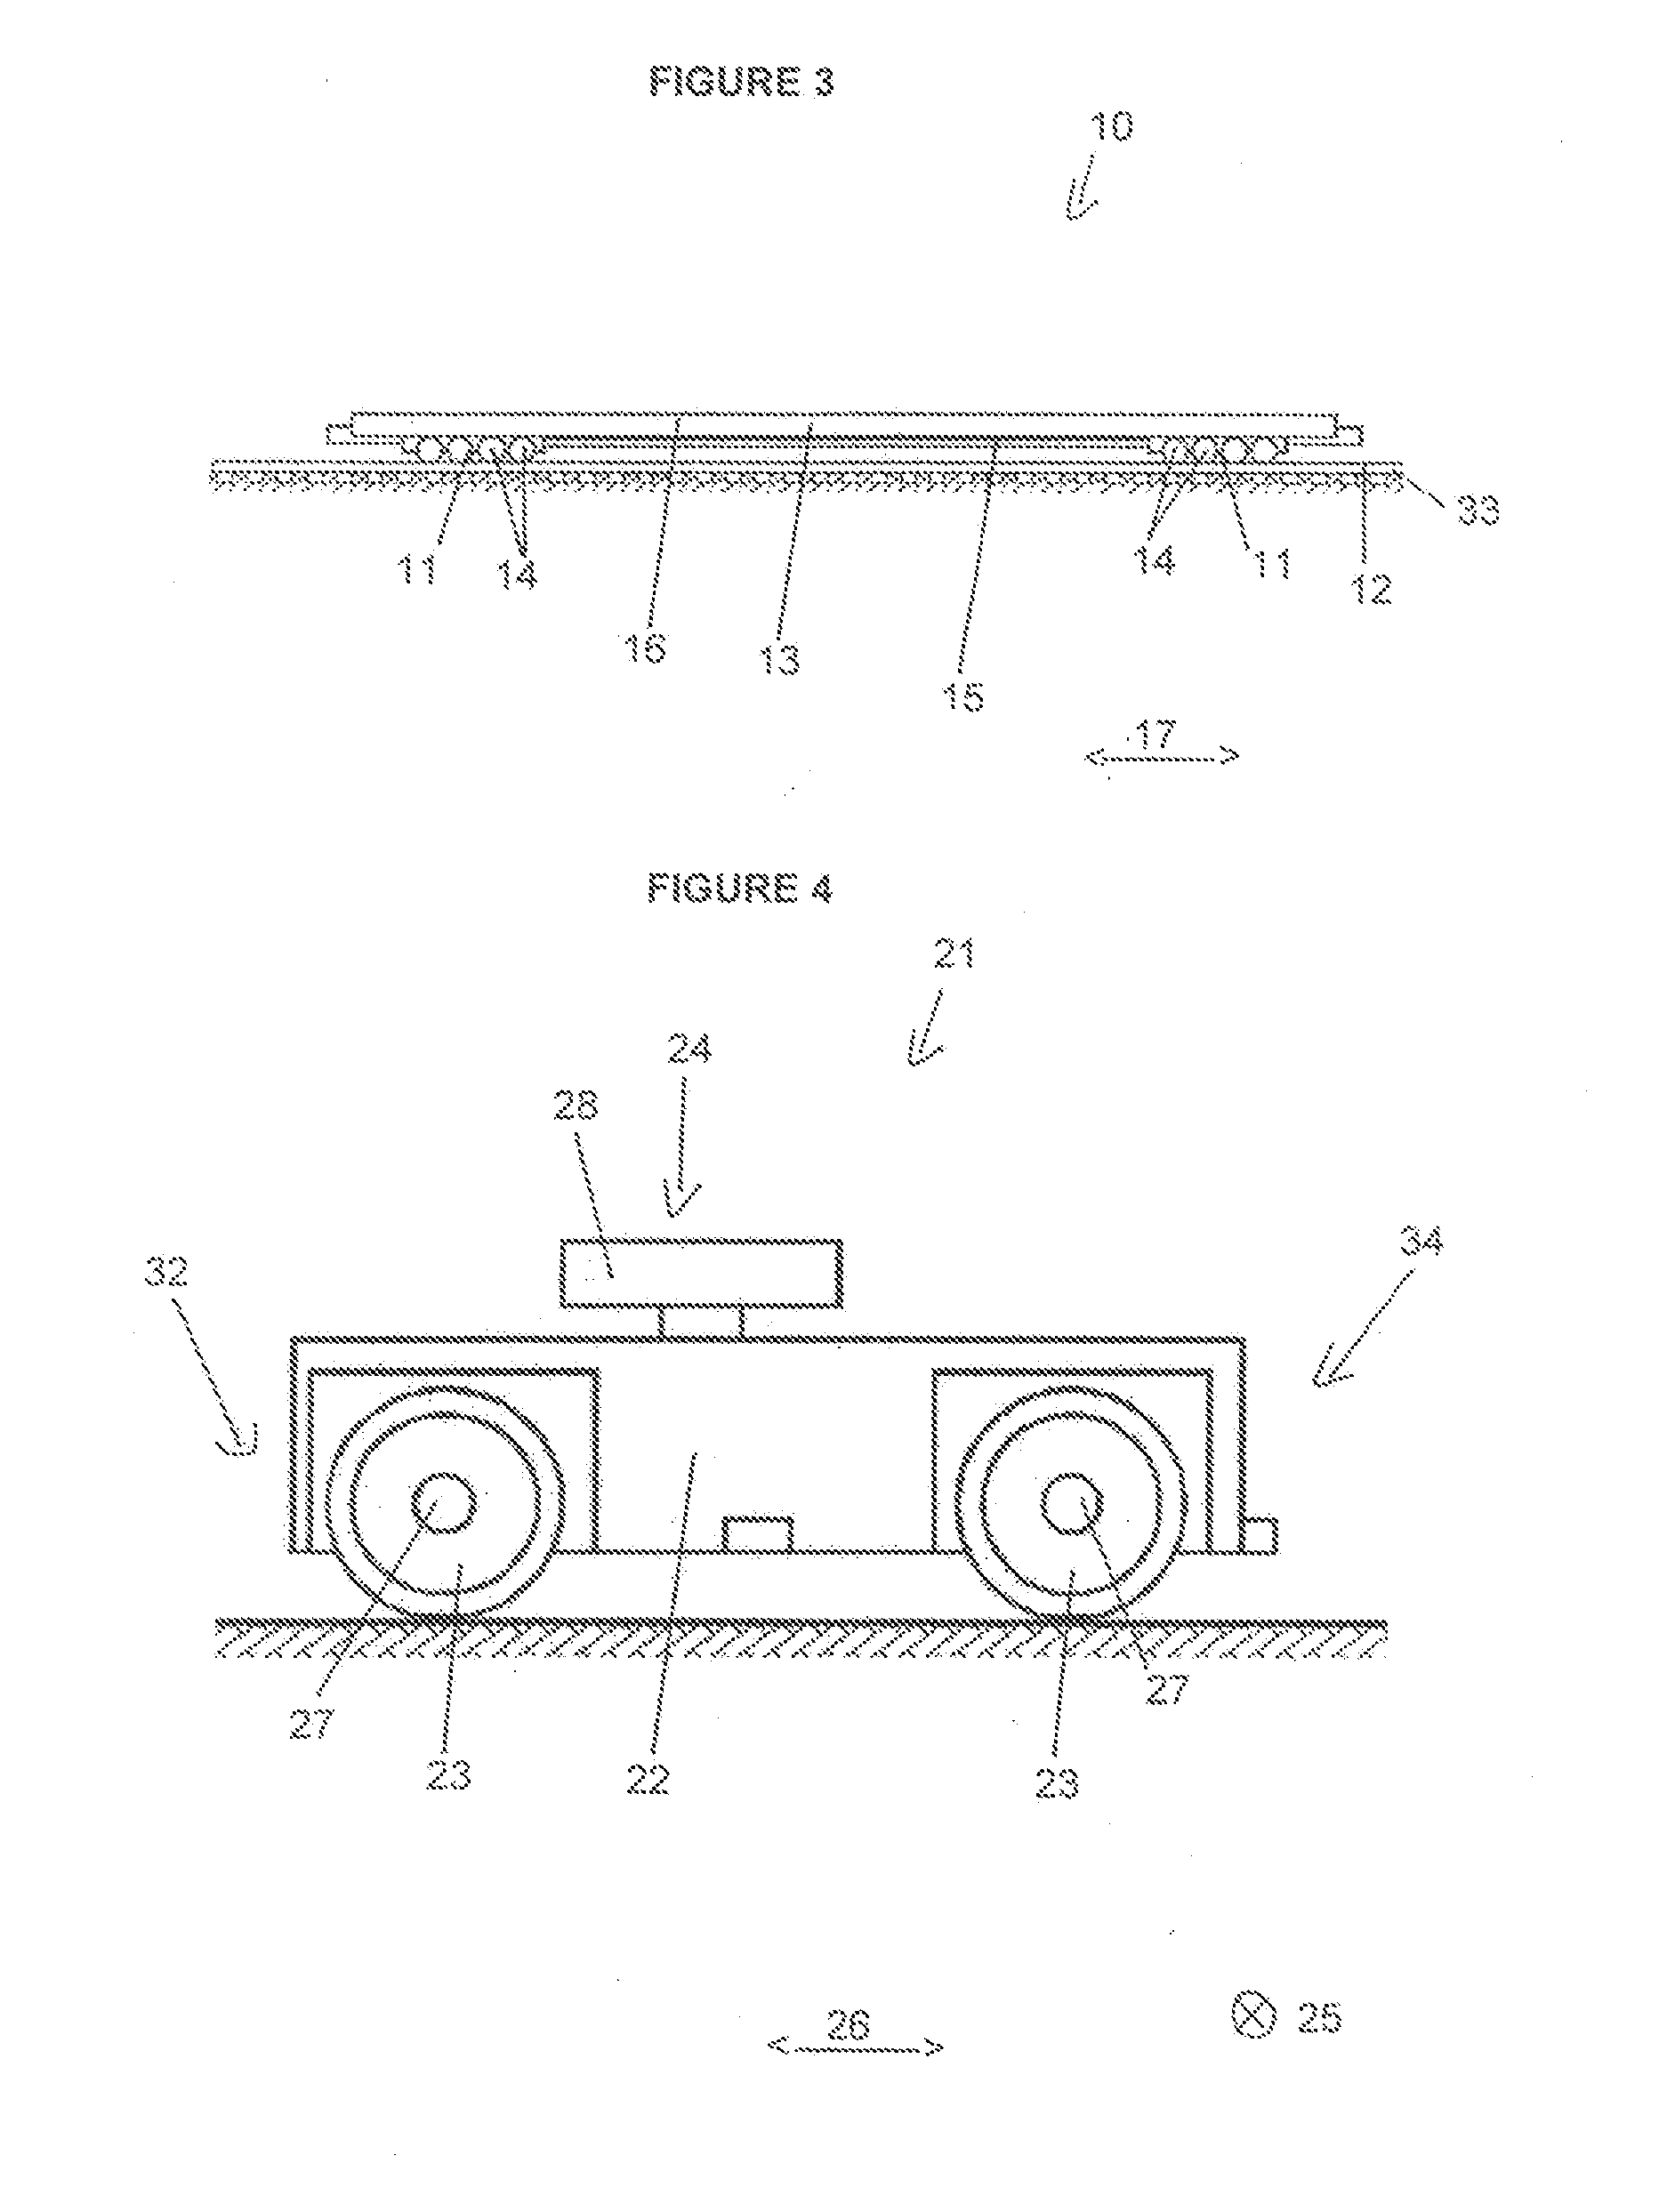 Method and transfer terminal for transferring semi-trailers from railway to roadway, and vice versa and for transporting semi-trailers by rail, as well as traction vehicle for semi-trailers and tractor trailer unit